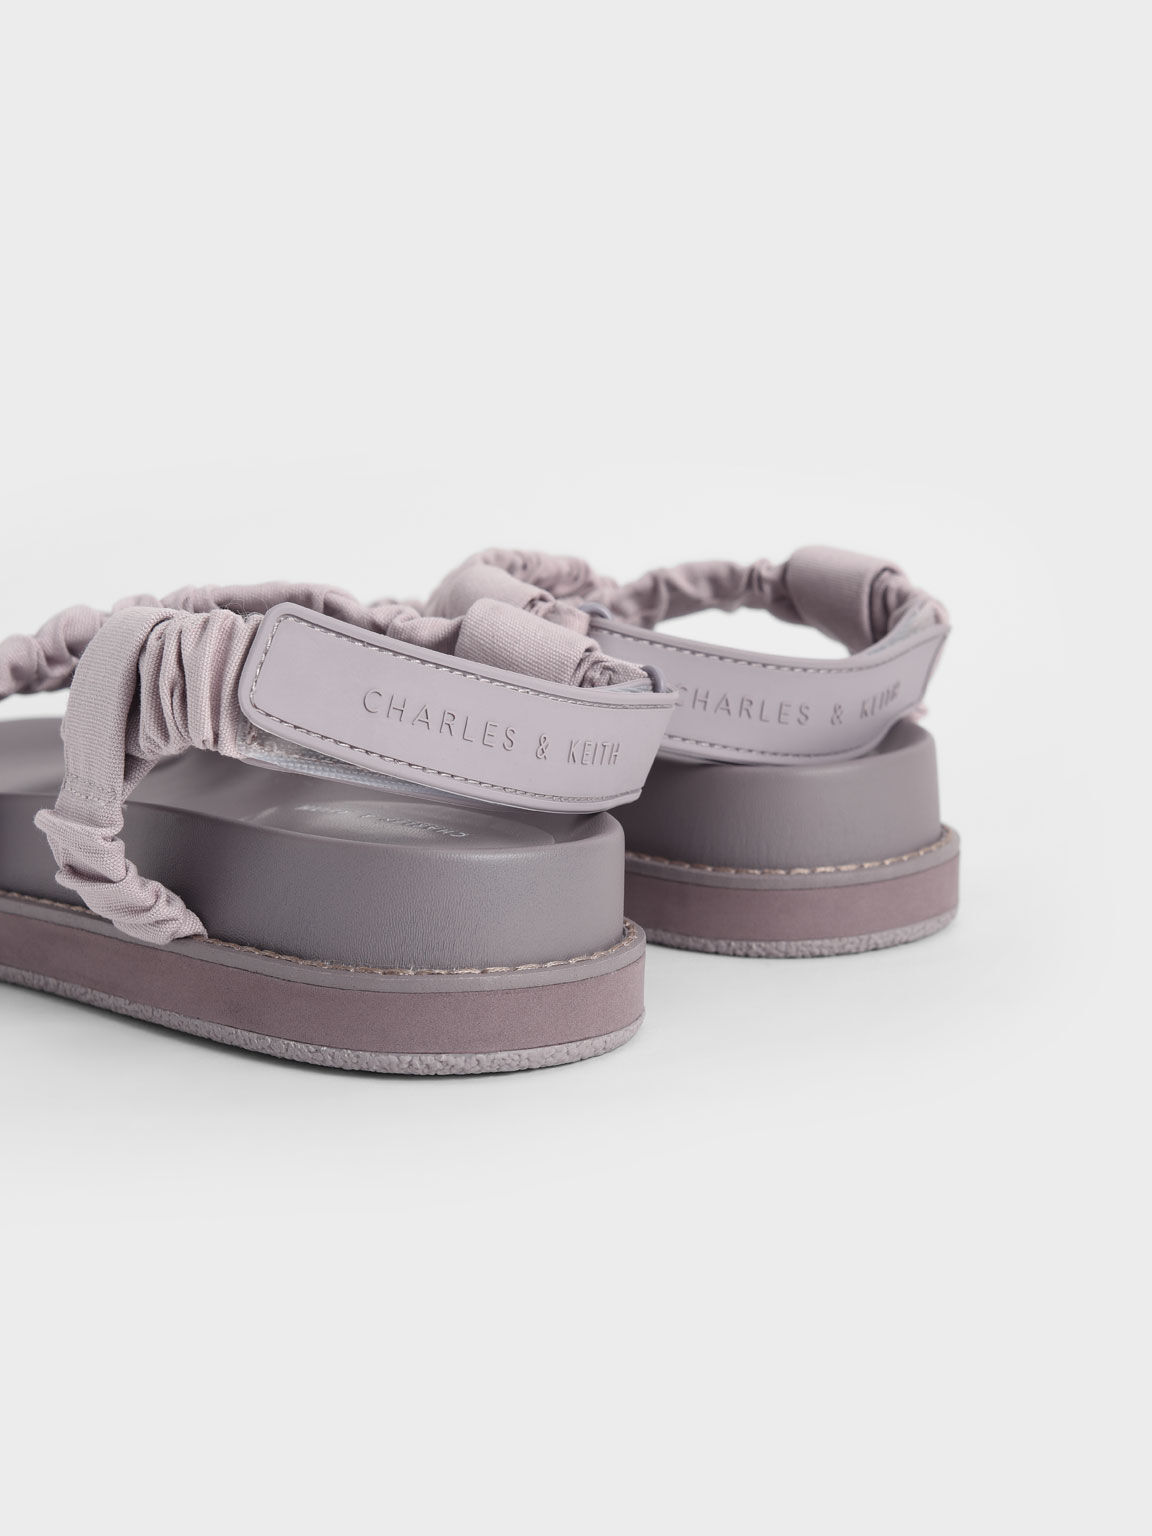 Canvas Ruched Crossover Sandals, Lilac, hi-res